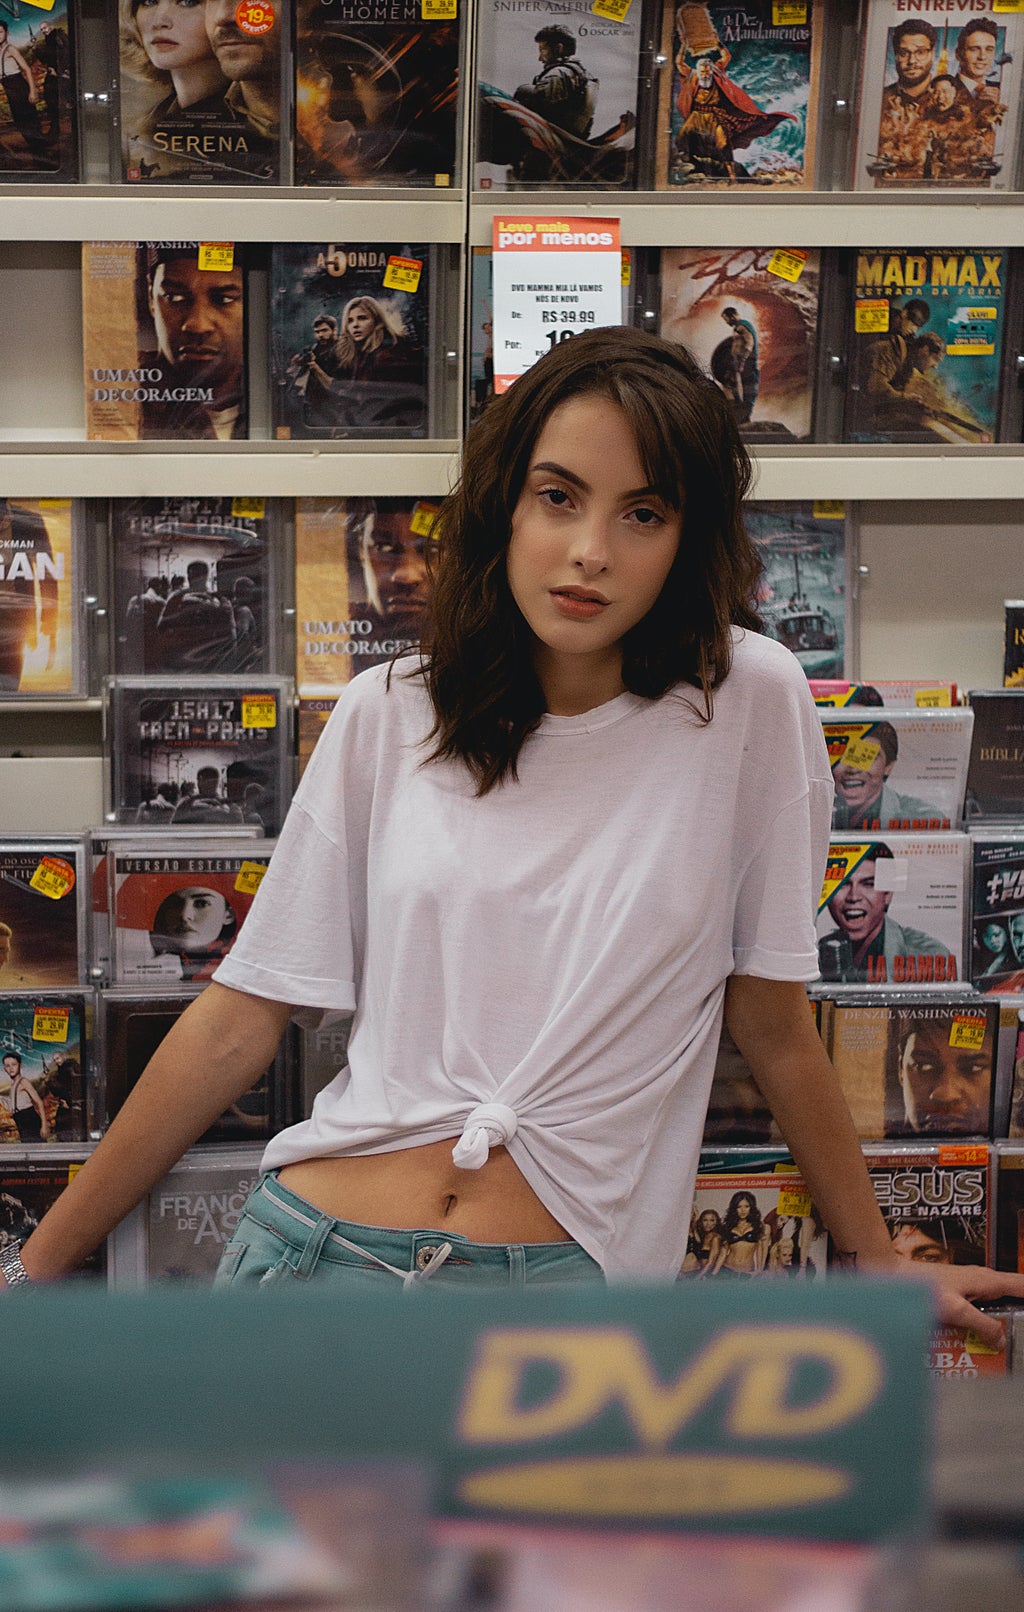 woman standing in front of movie store